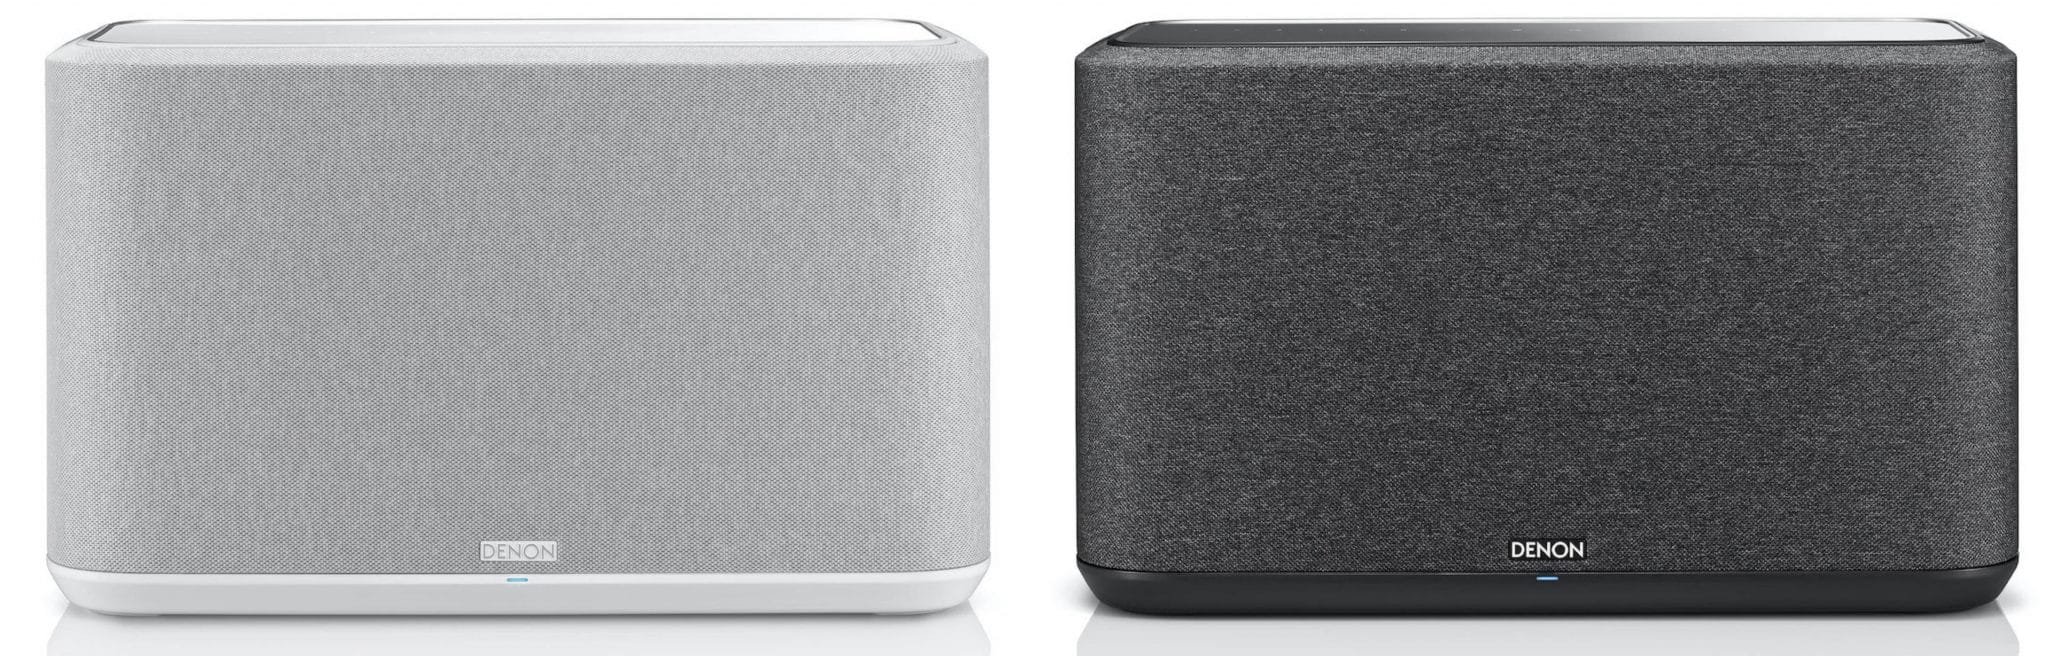 Home wireless speakers From Denon